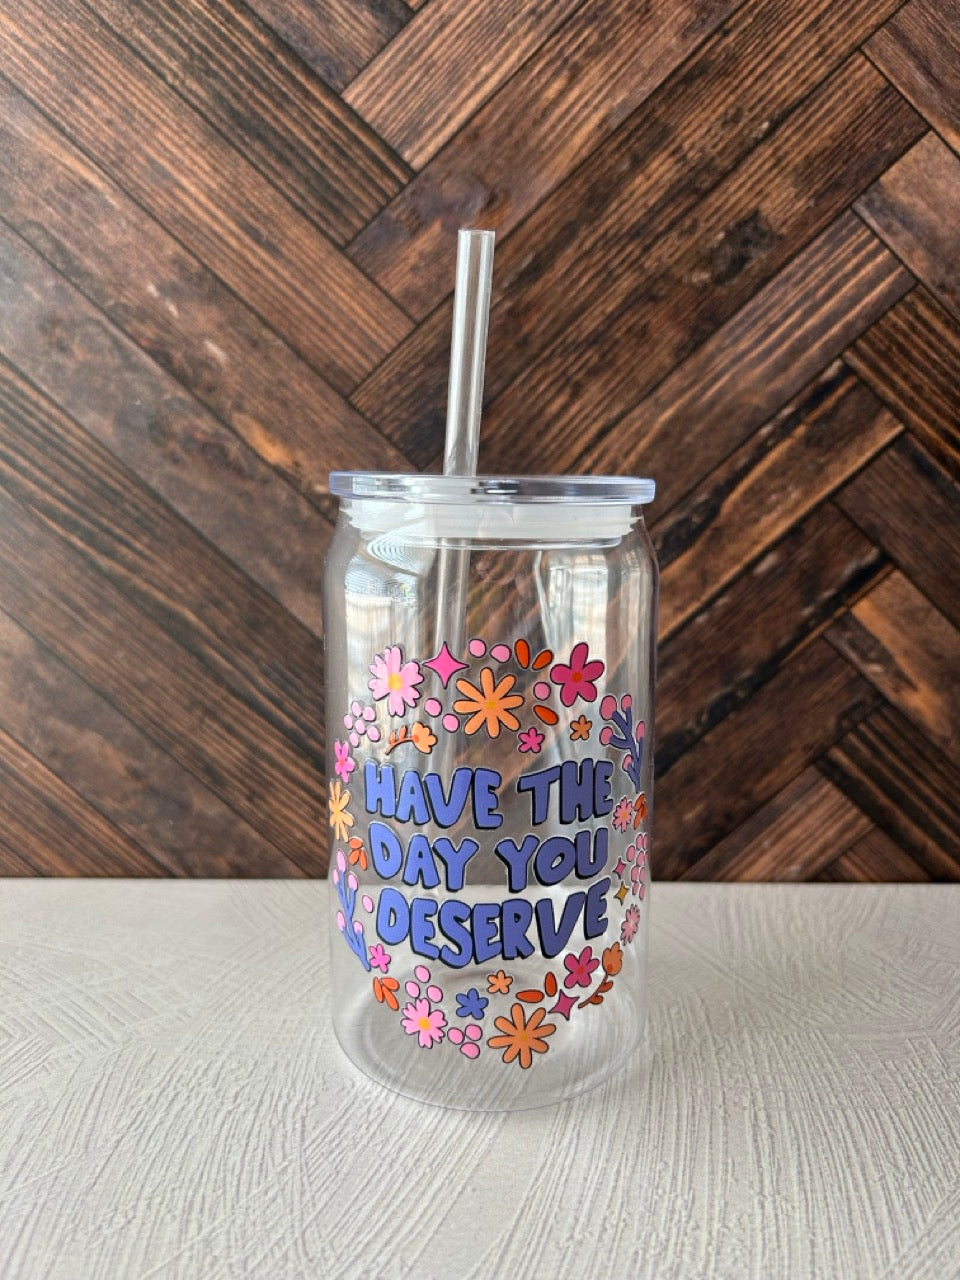 Unbreakable Cups for Adults with Funny Sayings (Spill-Resistant!)